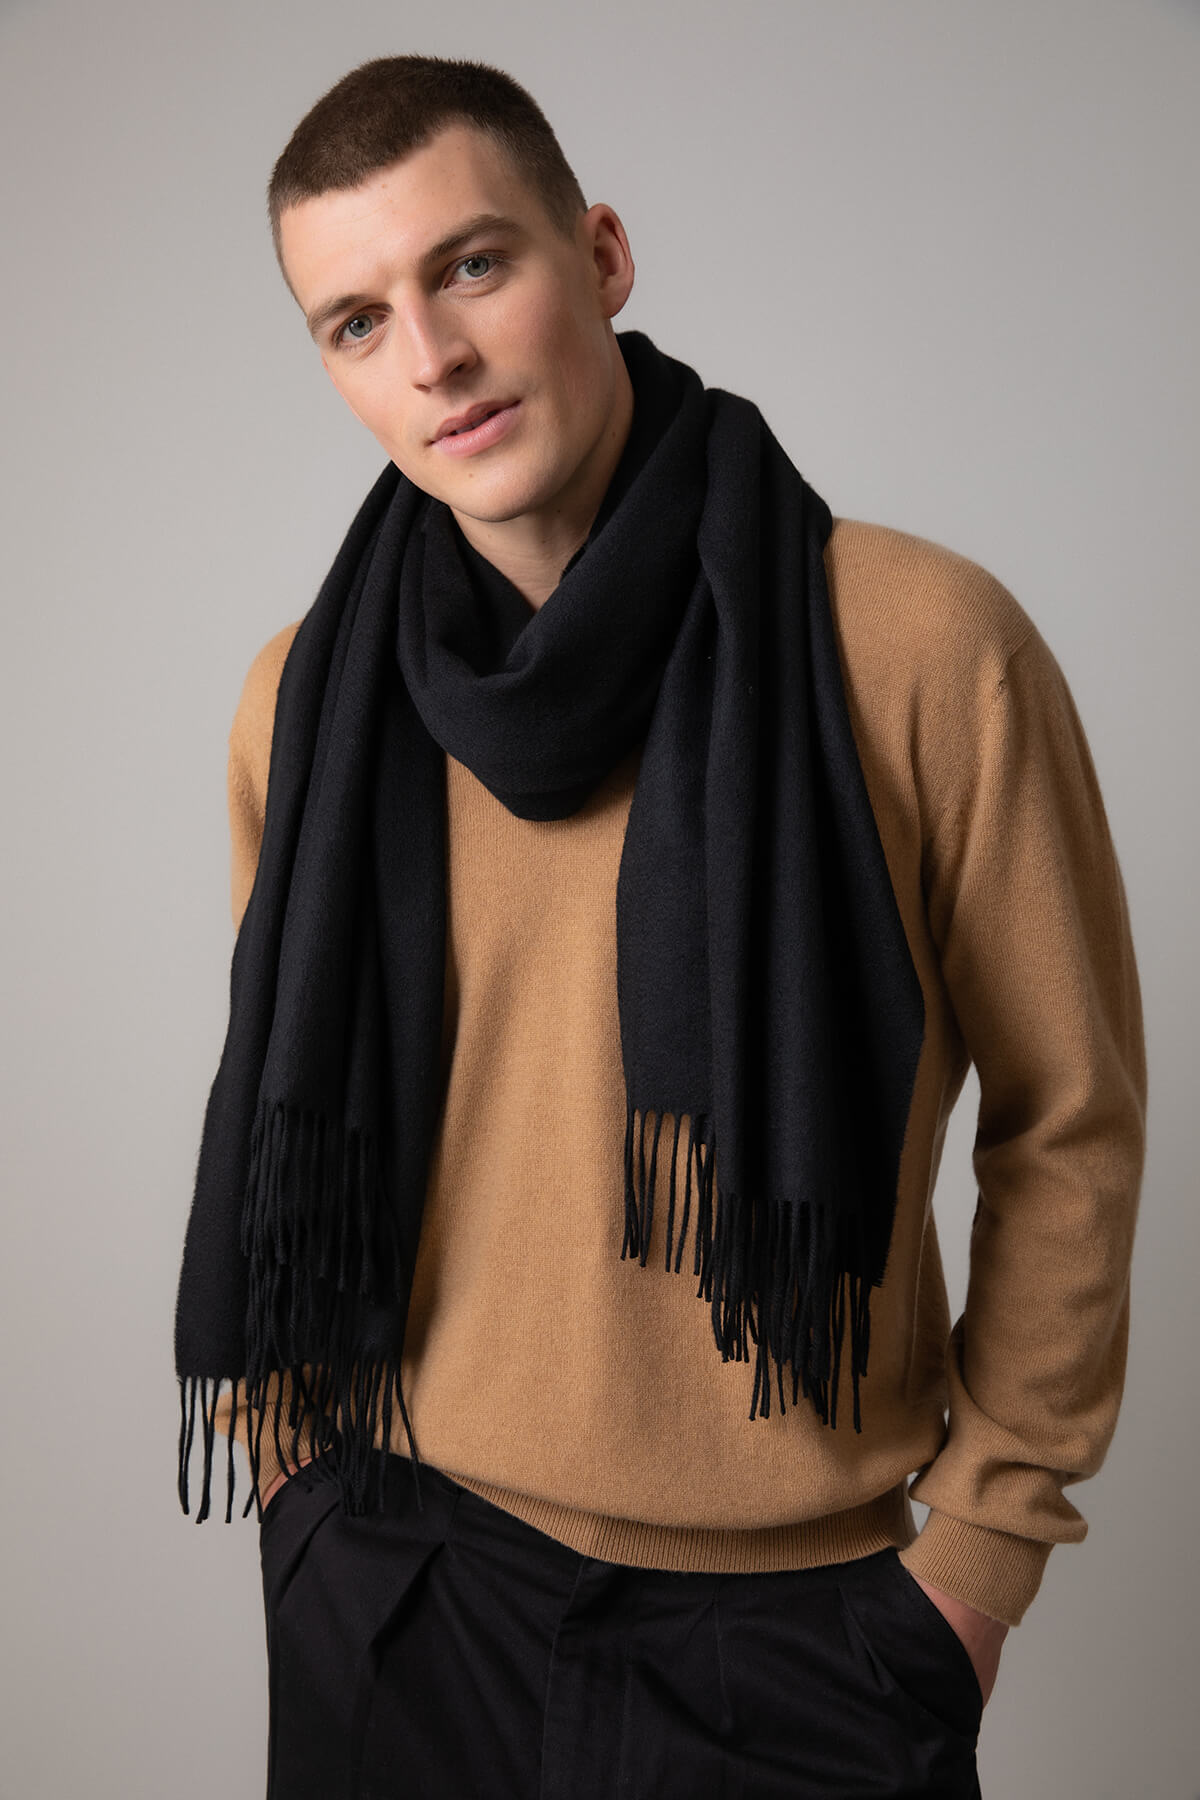 Model wearing Johnstons of Elgin 100% Cashmere Stole in Black on a grey background WA000056SA0900N/A